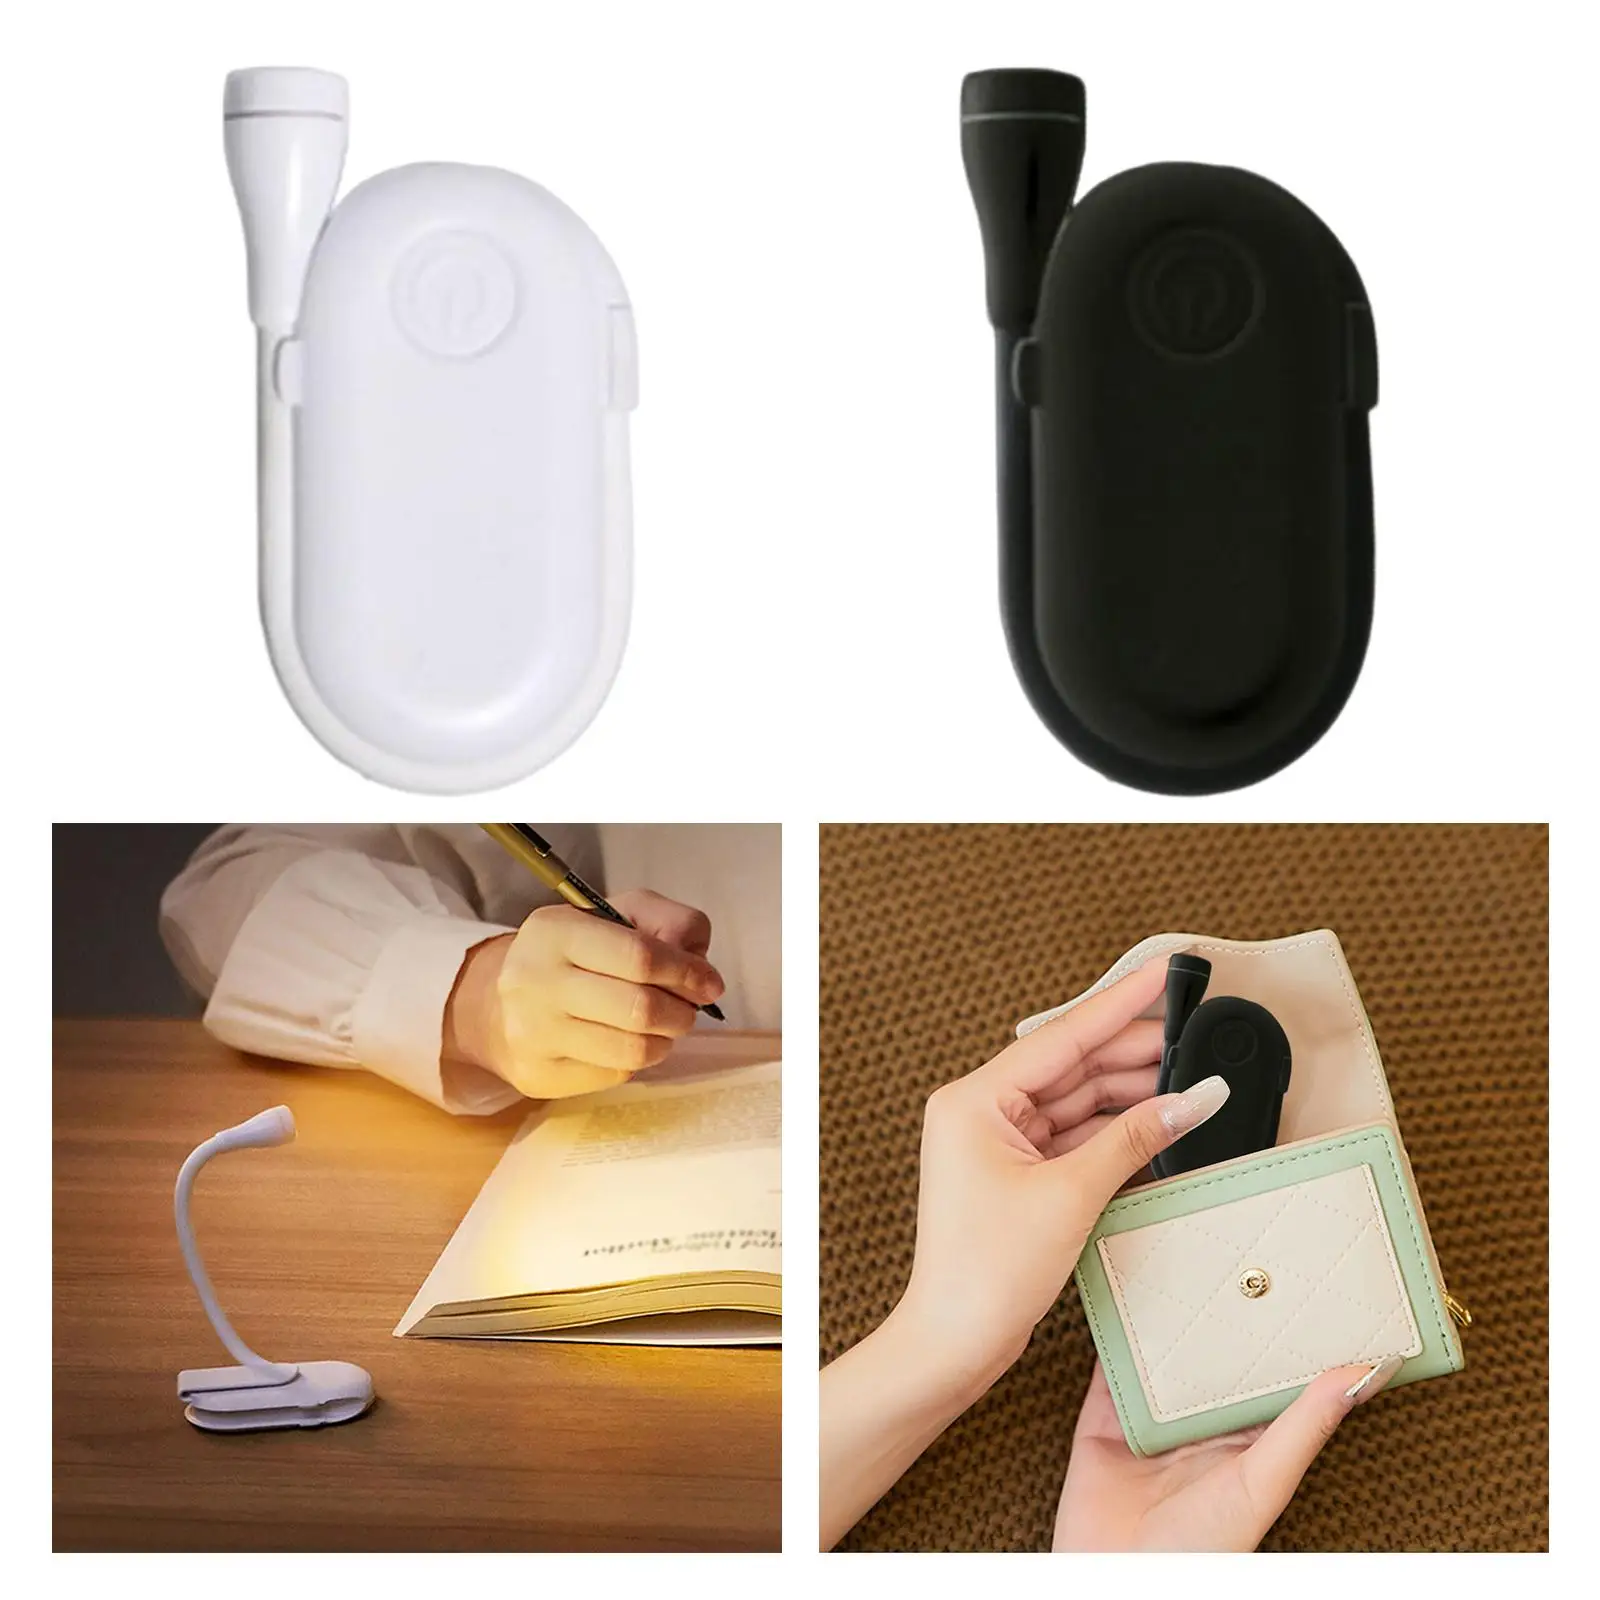 Portable Reading Light Book Light Rechargeable Reading Lamp Night Desk Lamp Eye Caring for Books Working Desktop Bed Music Stand